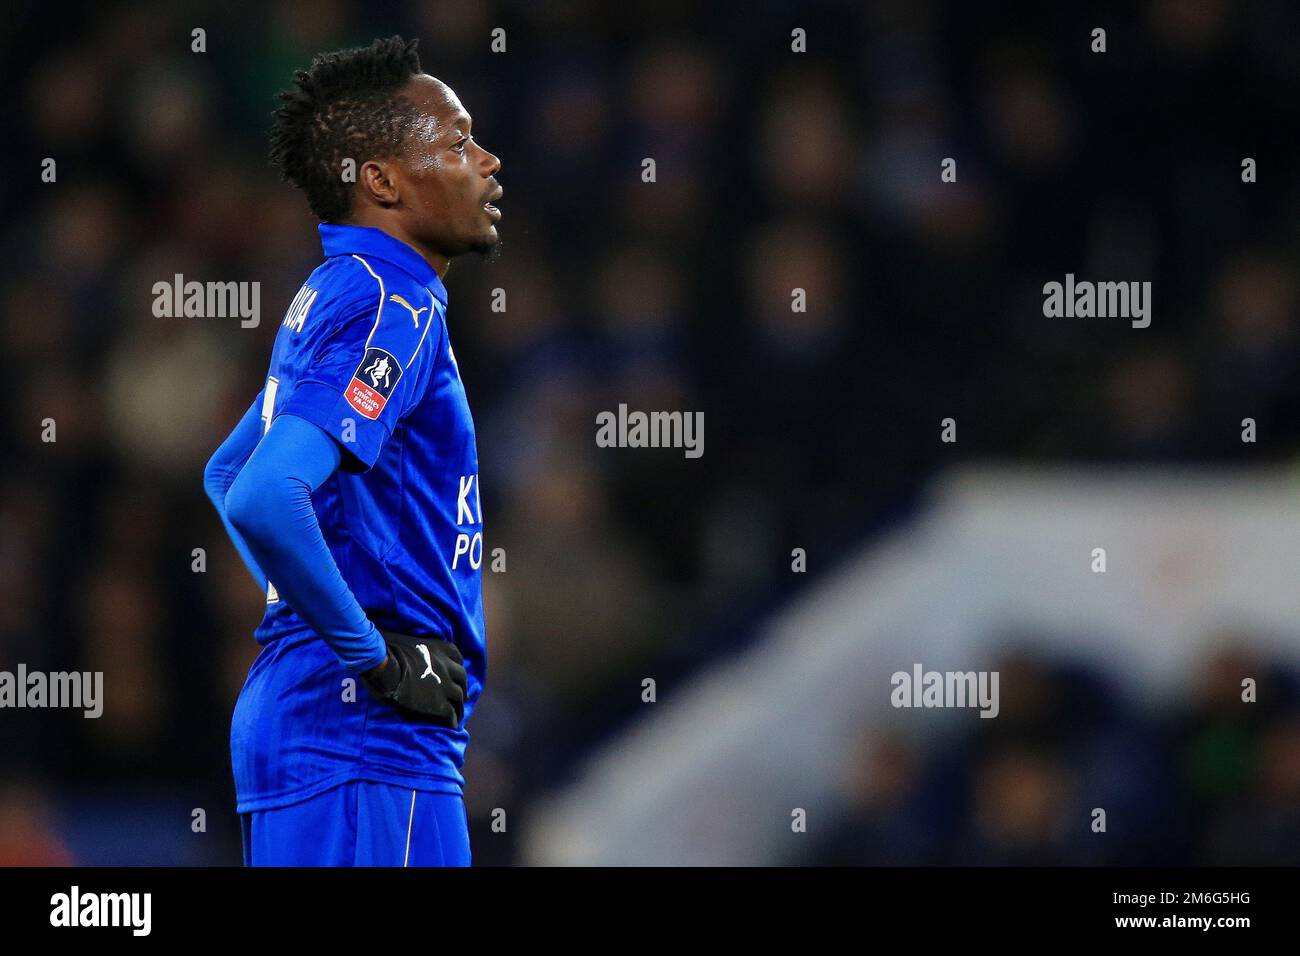 A dejected Ahmed Musa of Leicester City - Leicester City v Derby County, The Emirates FA Cup Fourth round replay, King Power Stadium, Leicester - 8th February 2017. Stock Photo